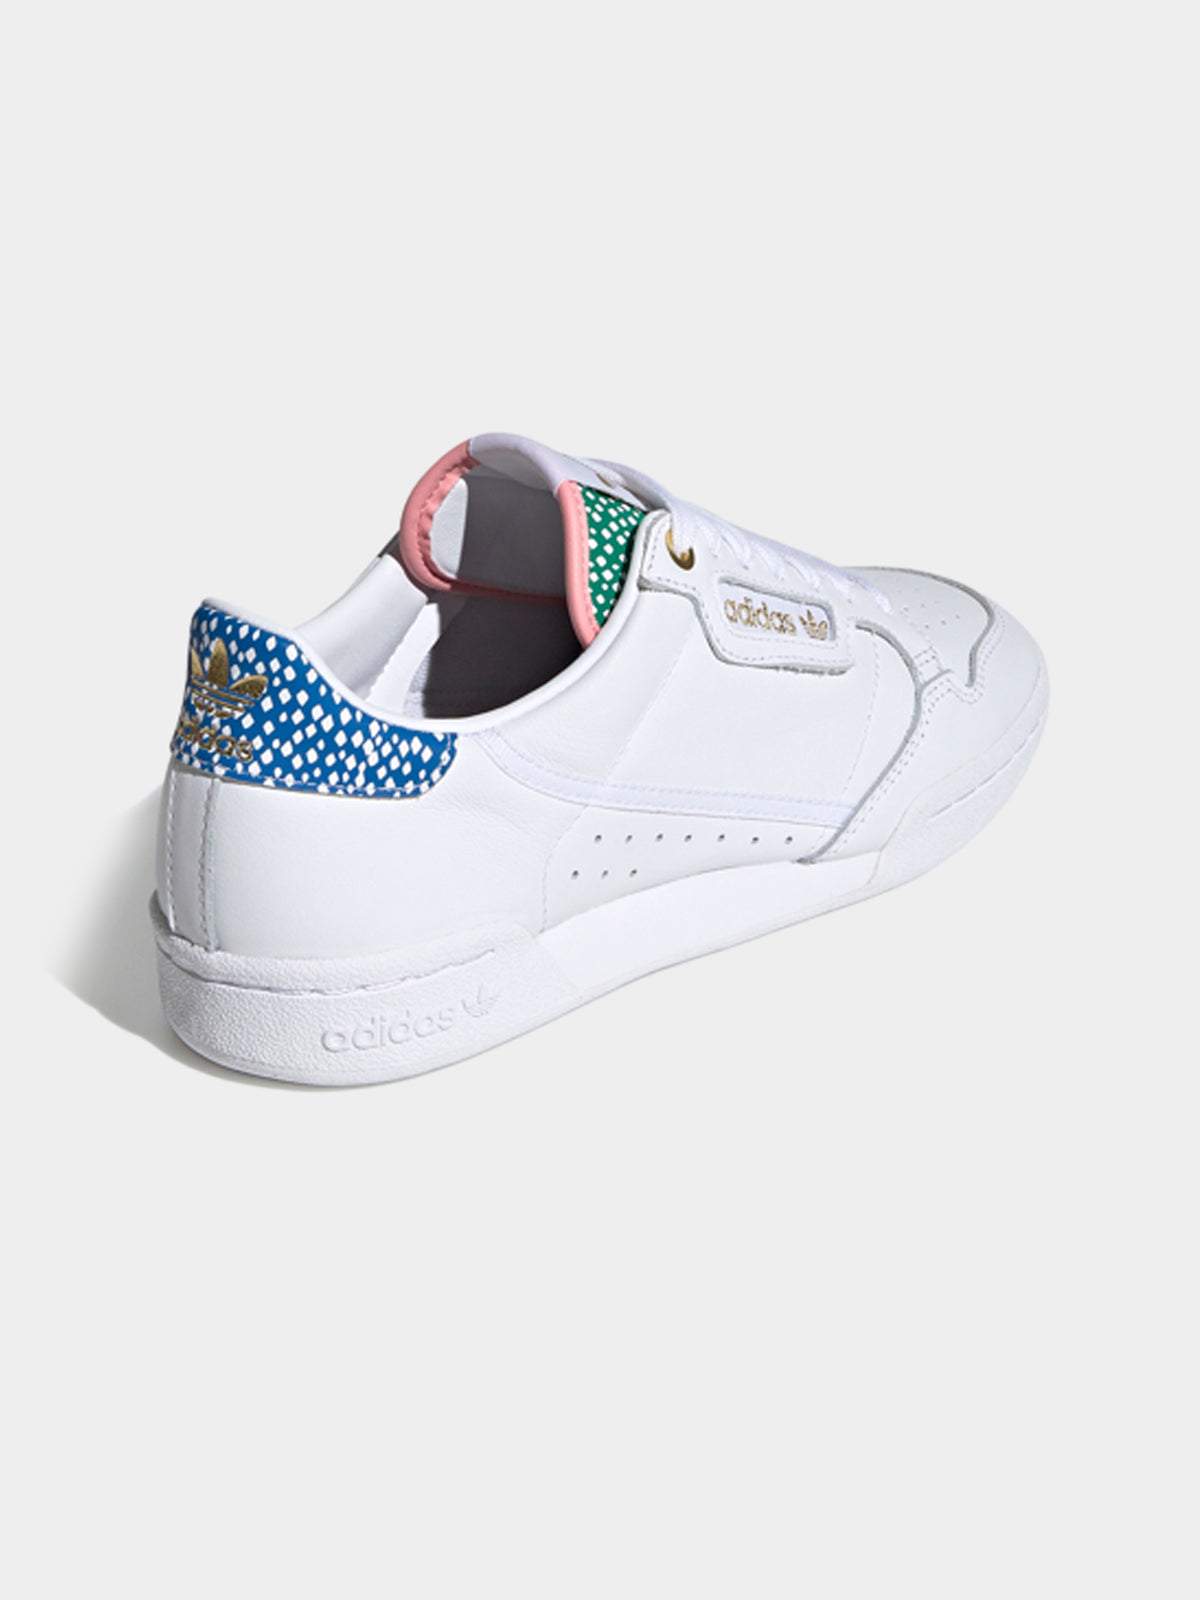 Womens Continental 80 Sneakers in Cloud White, Gold Metallic and Glow Pink